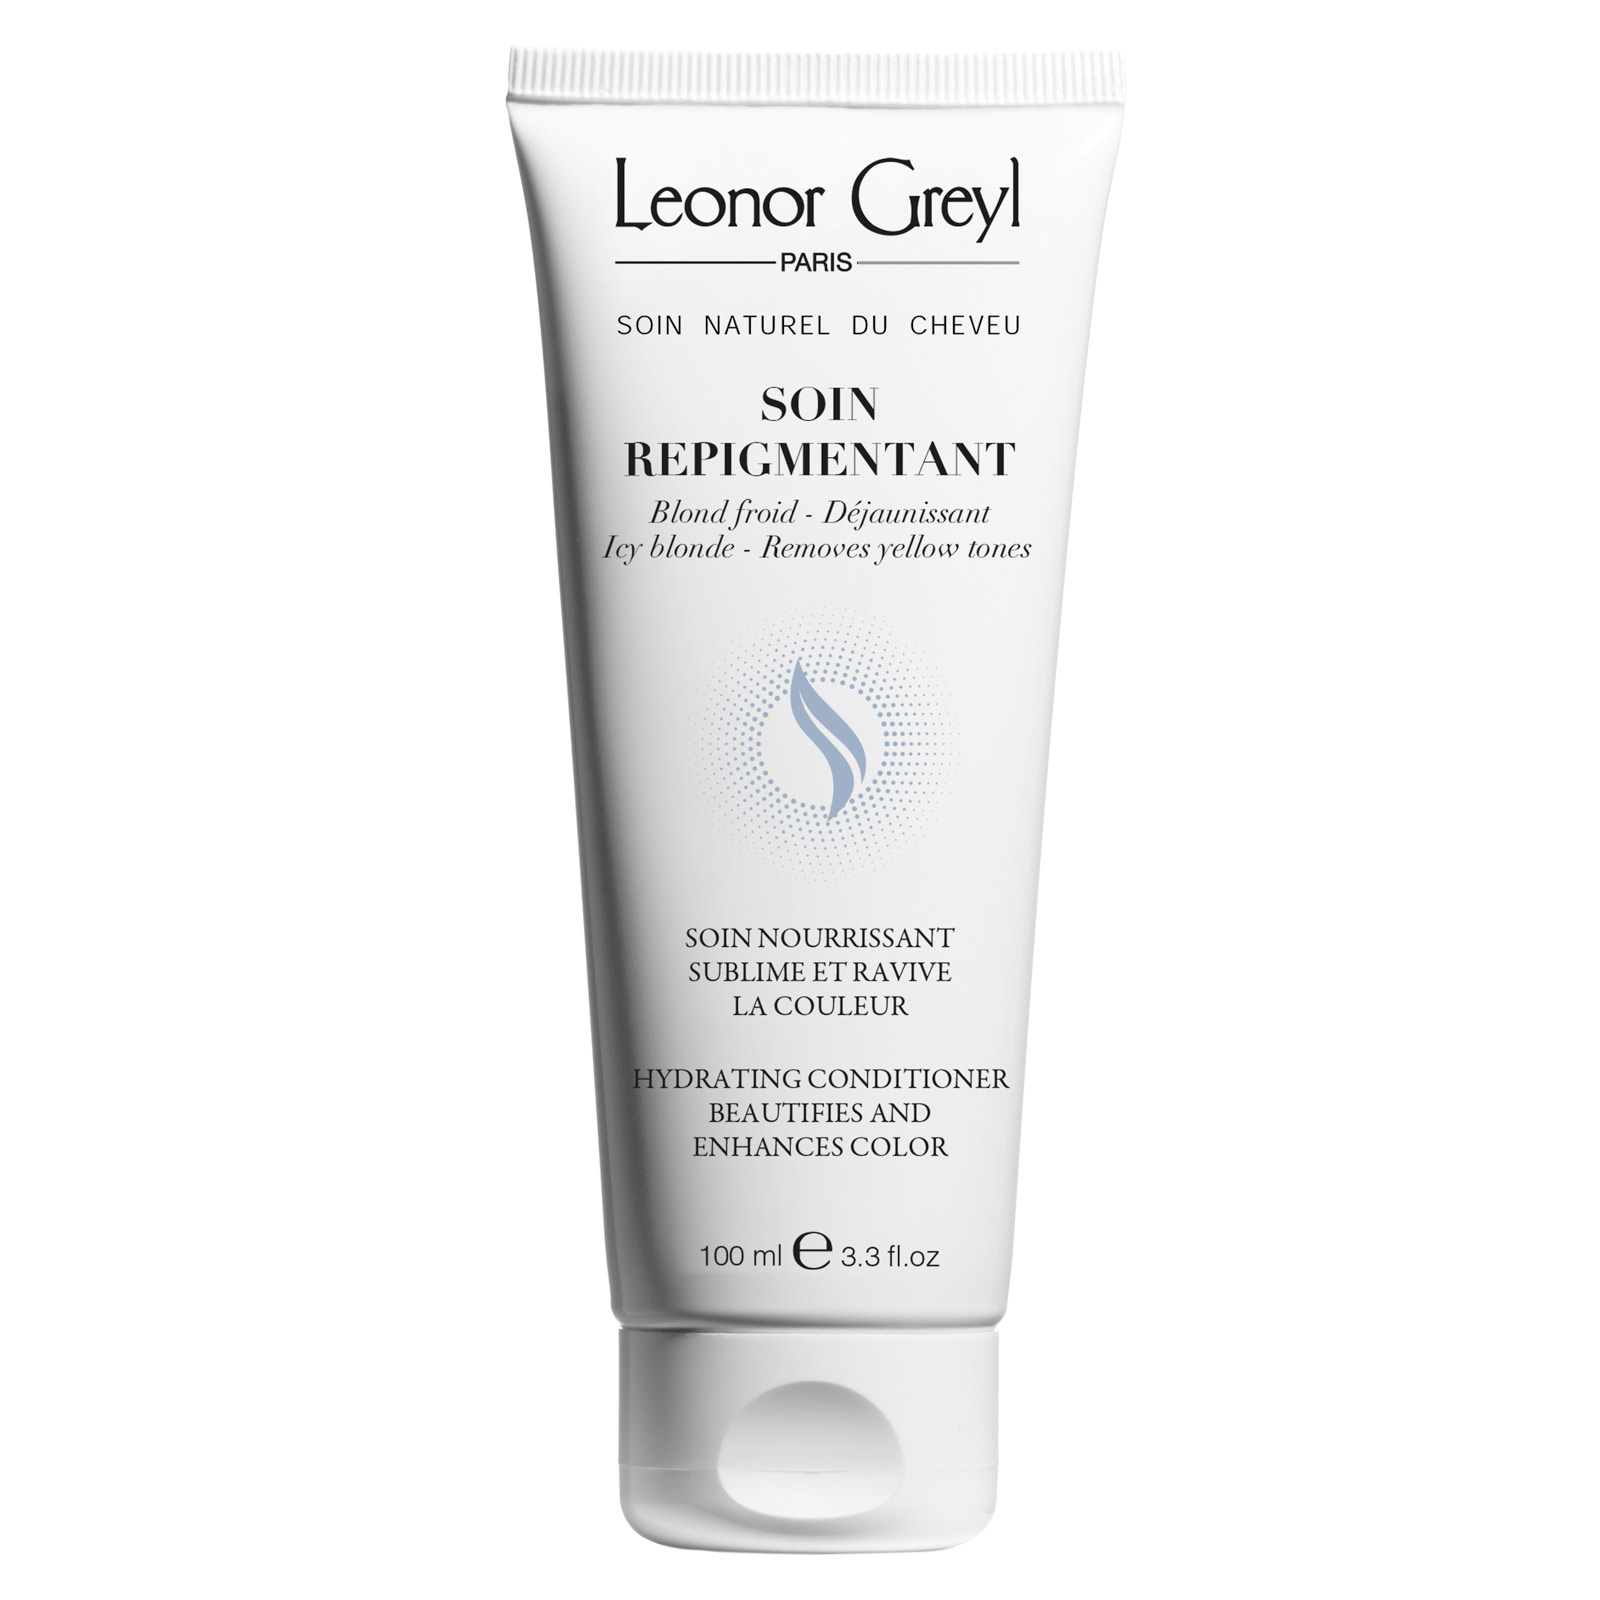 soin repigmentant icy blonde travel size | Leonor Greyl